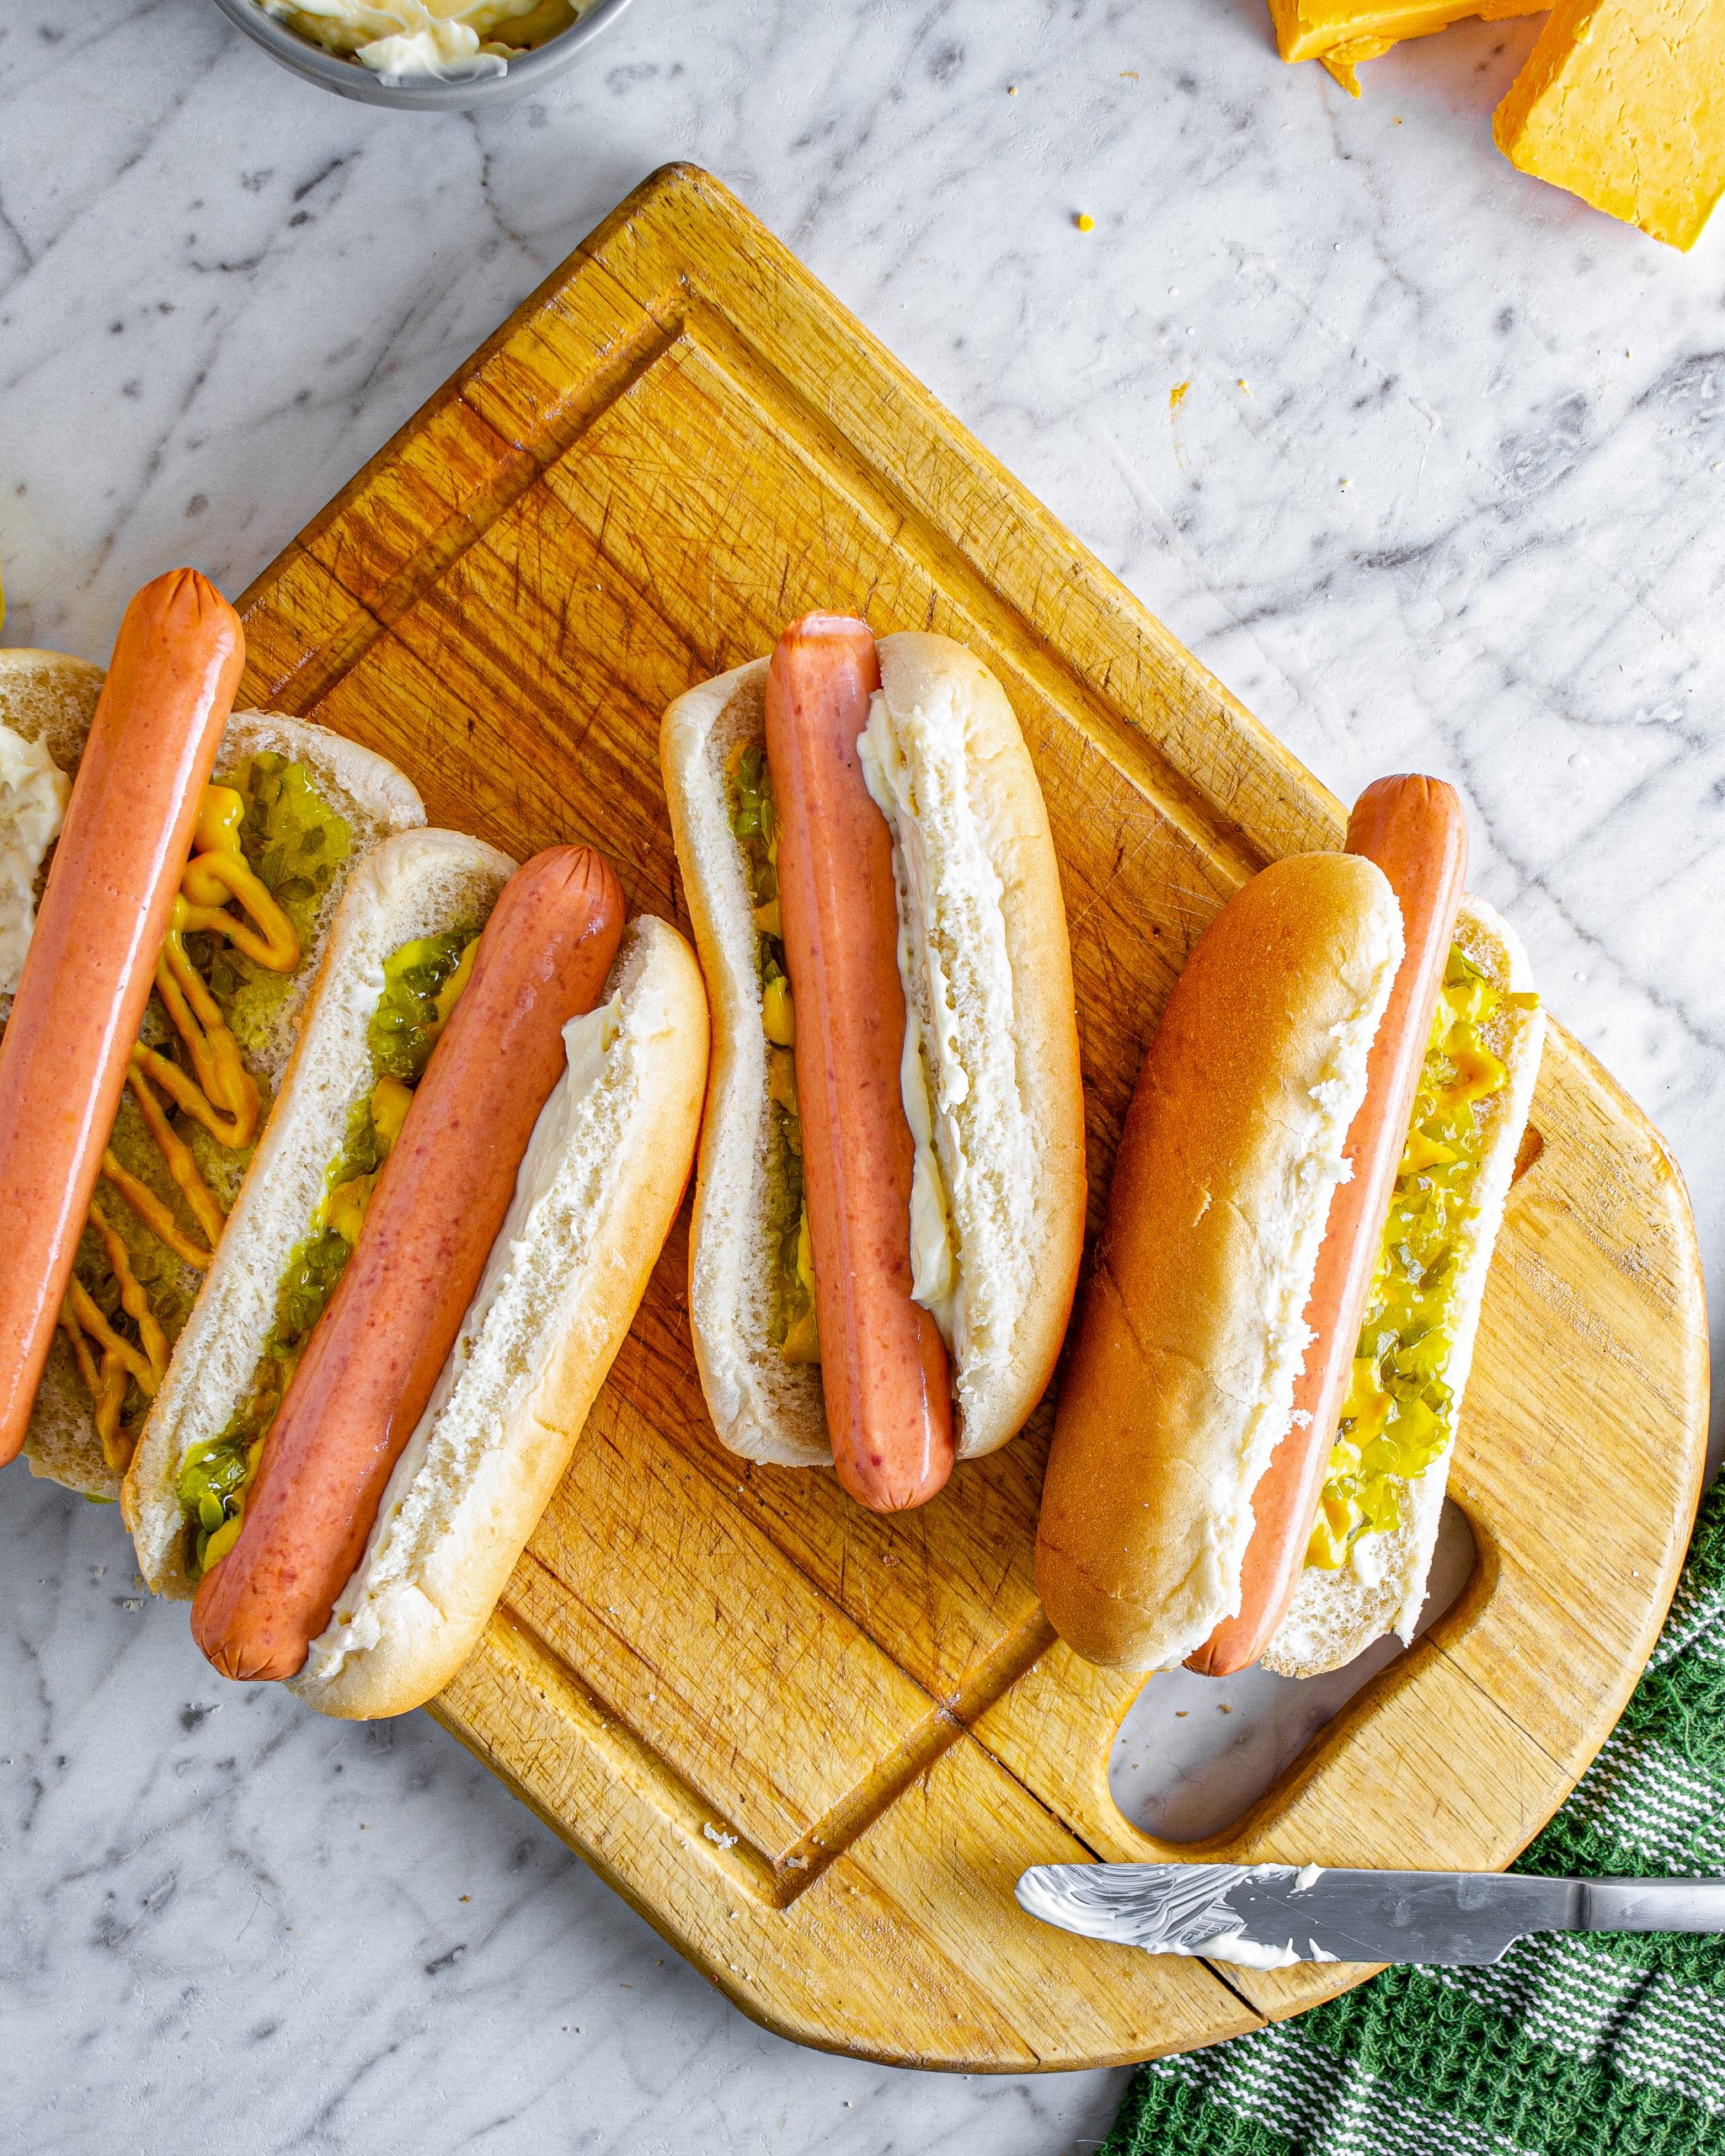 Place the hot dogs in the buns.